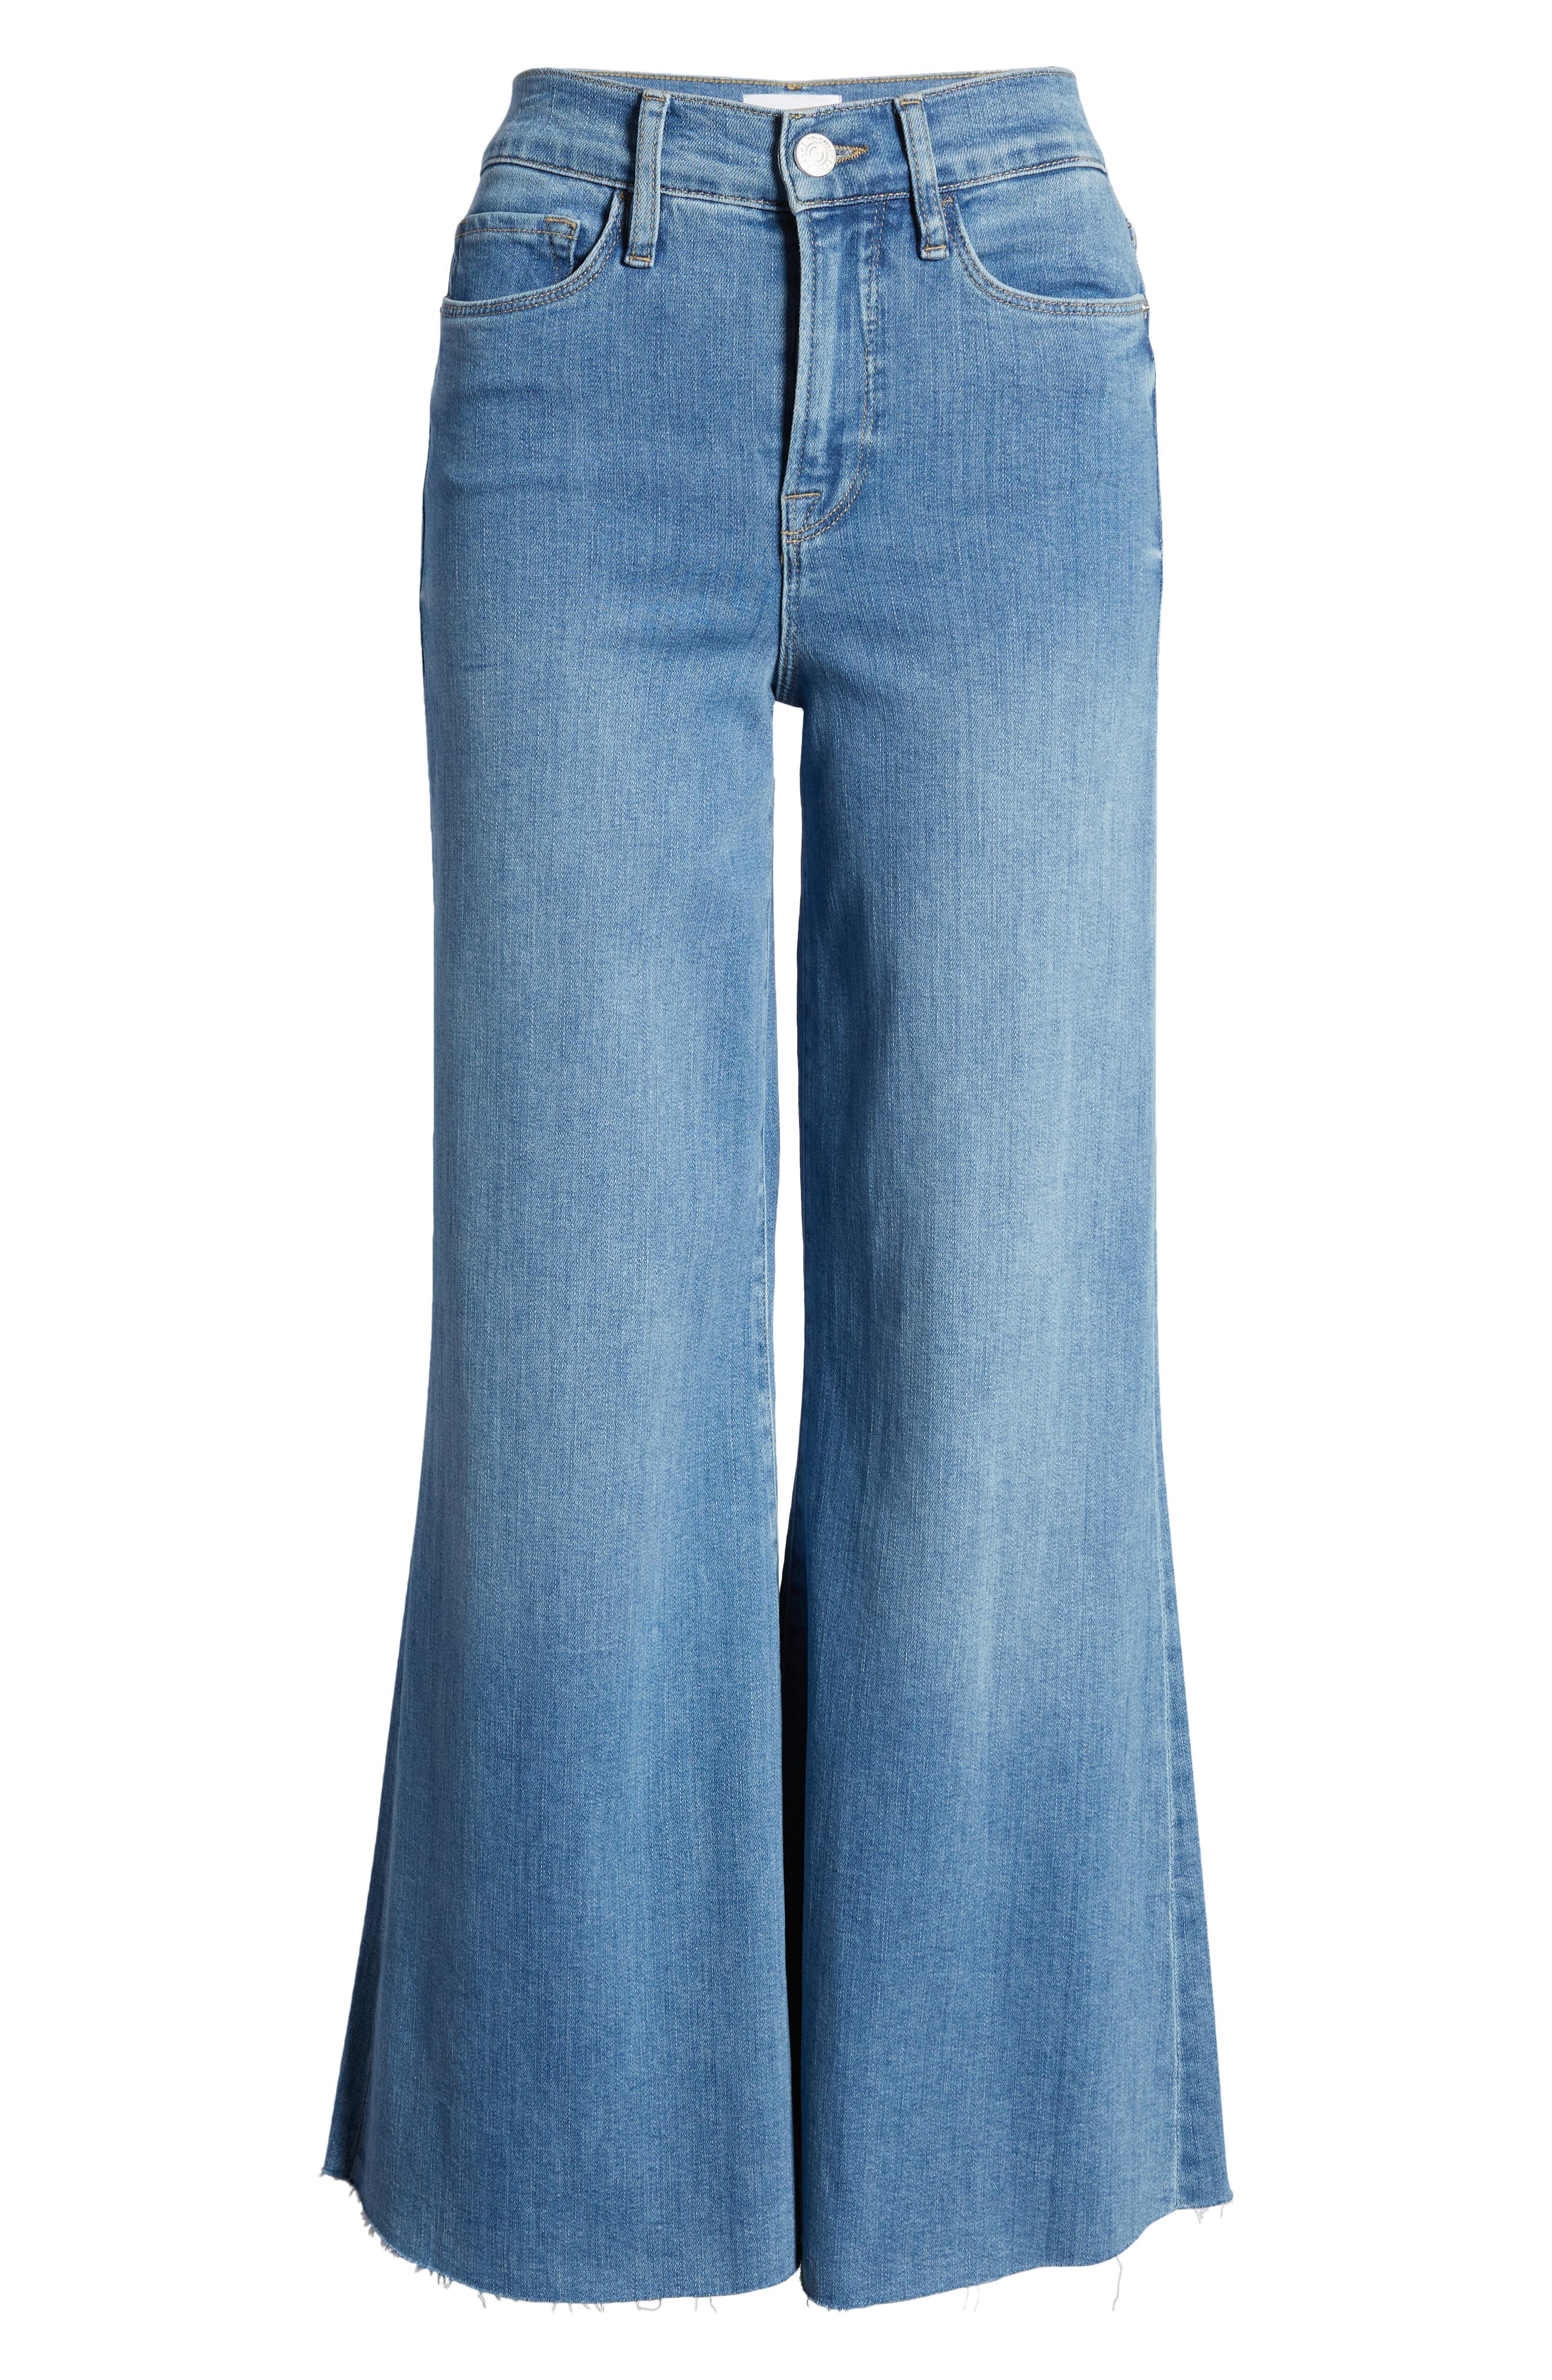 Here's How to Wear Wide-Leg Jeans This Spring | Who What Wear